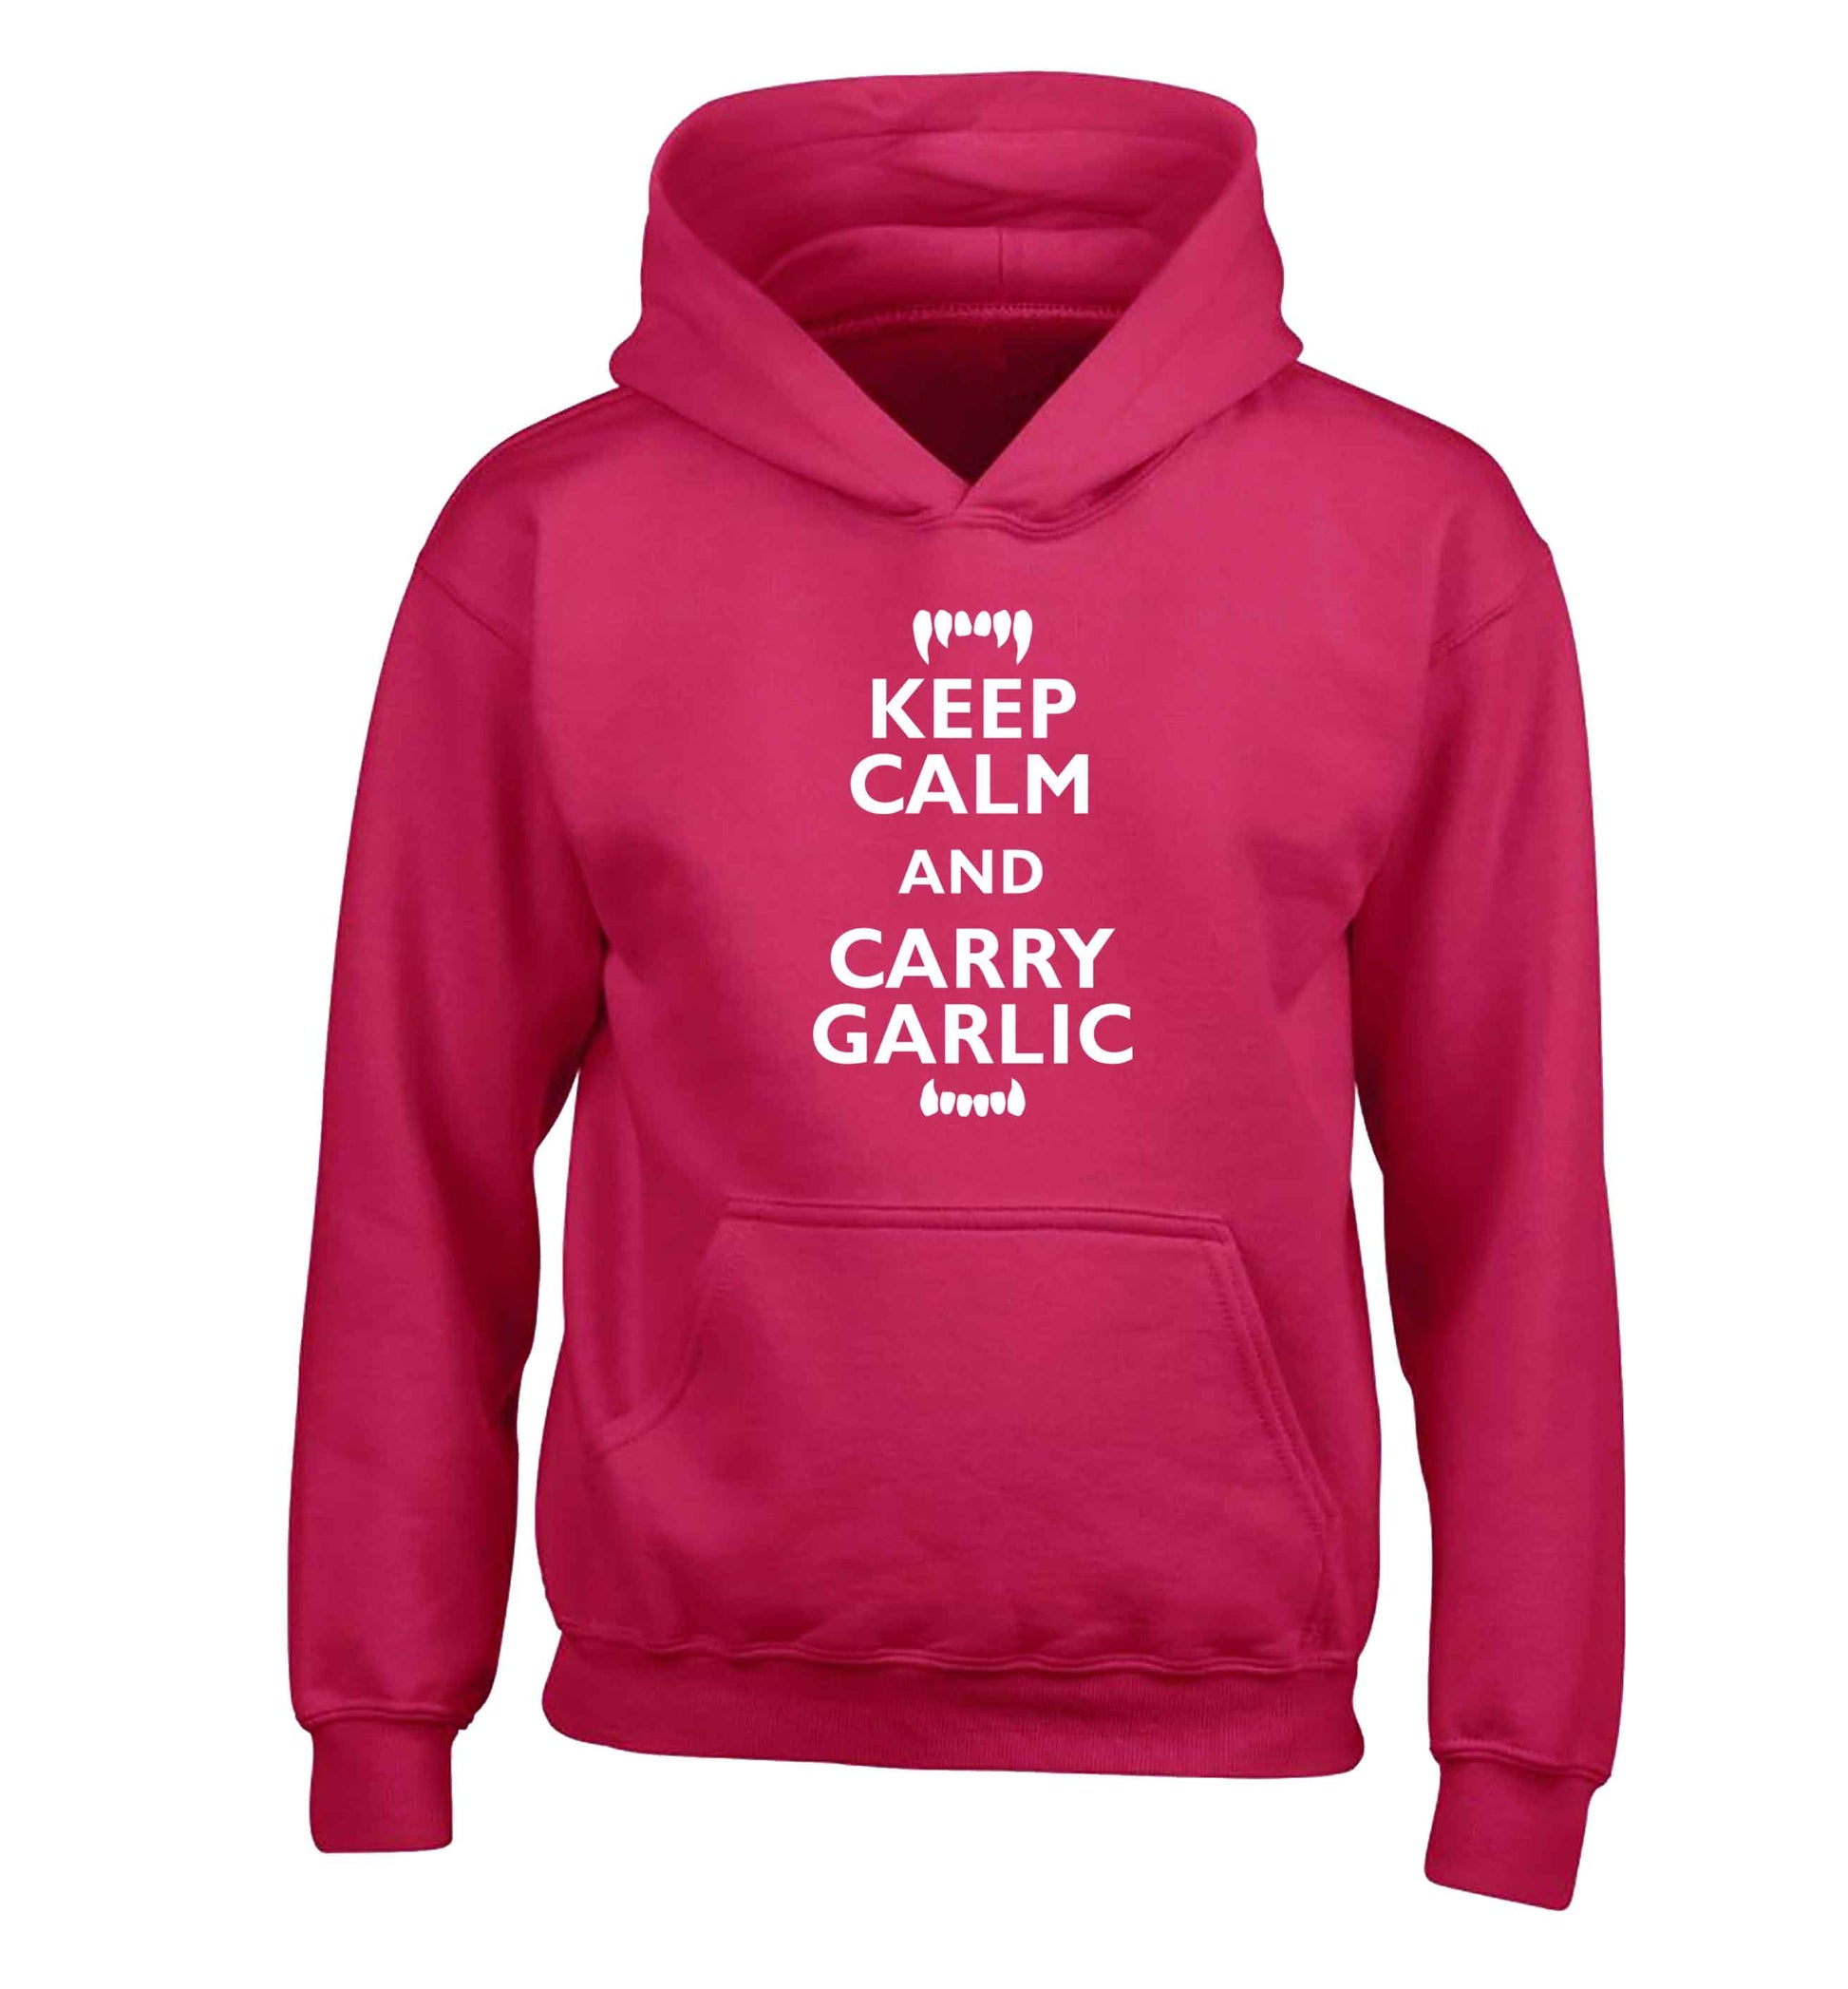 Keep calm and carry garlic children's pink hoodie 12-13 Years